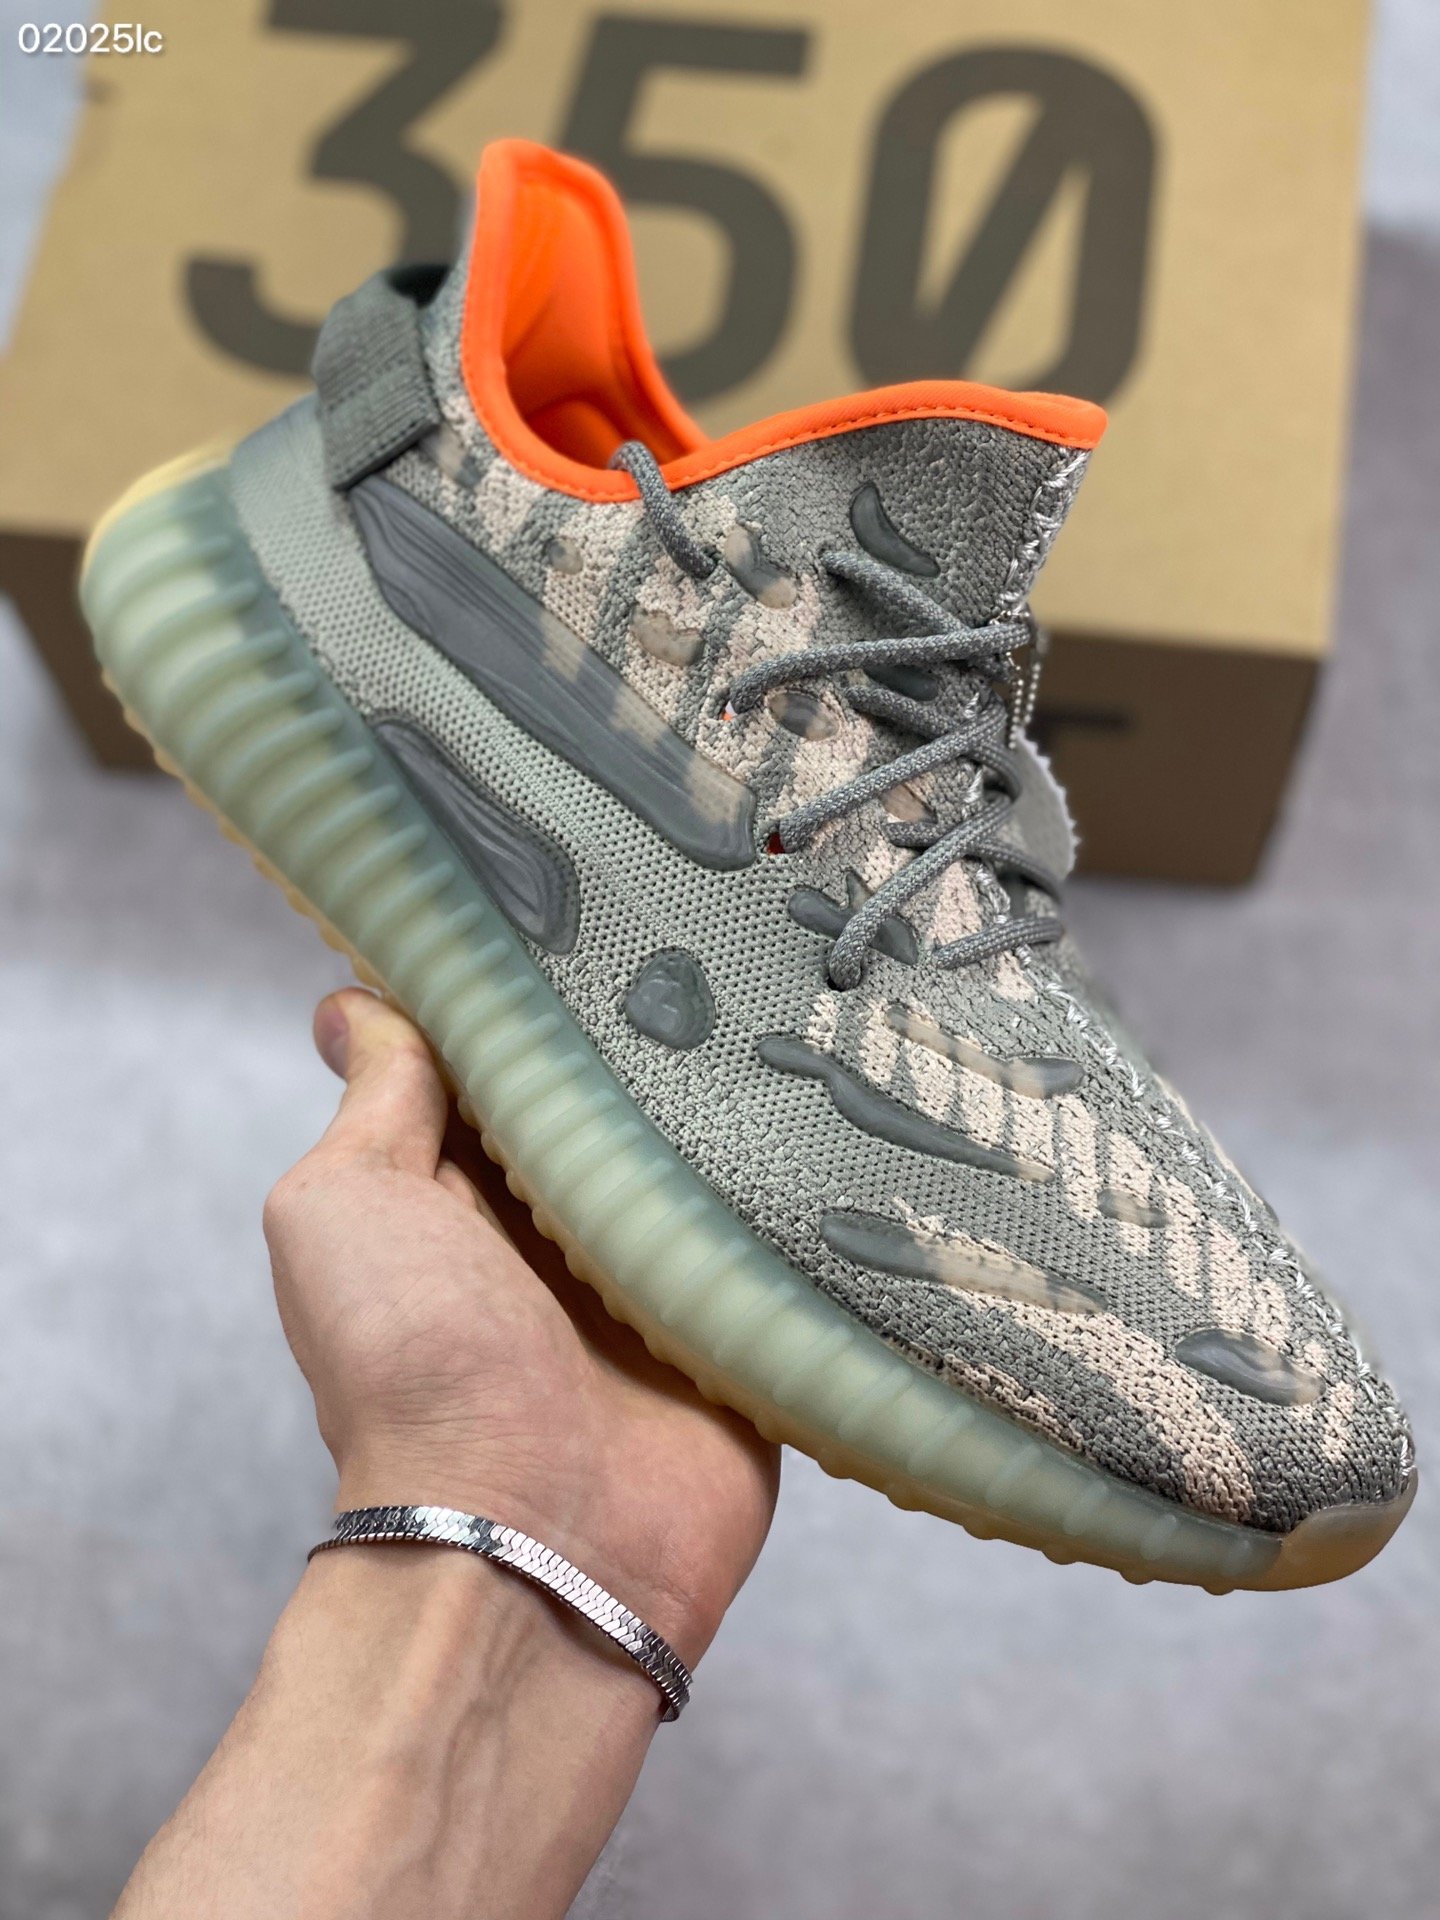 Cheap Cheap Adidas Yeezy Boost 350 V2 Yecheil Non Reflective Toddlers And Youth